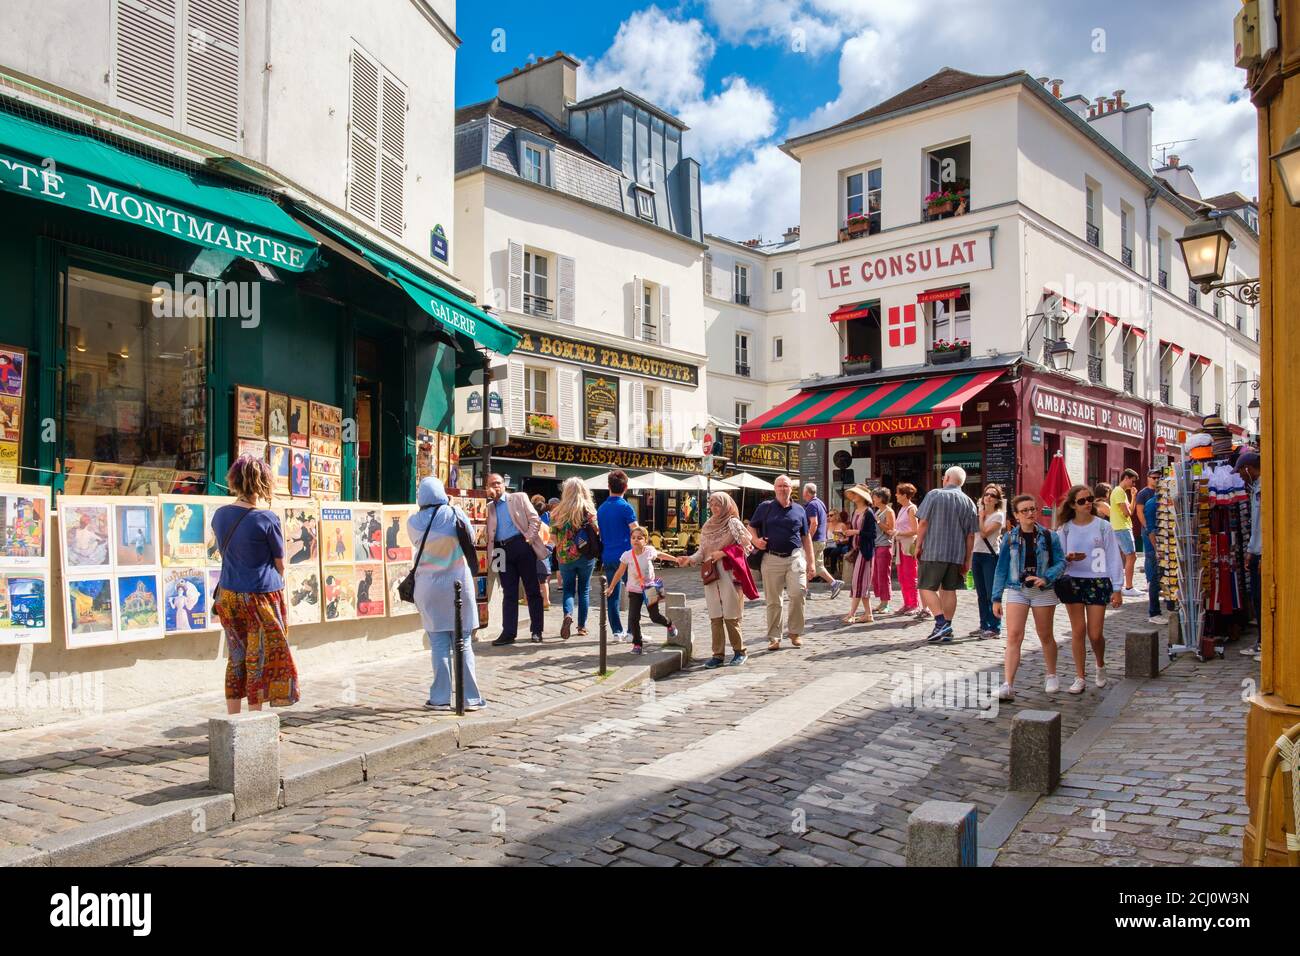 Typical cafes and art galleries in the bohemian neighborhood of Montmartre in Paris Stock Photo